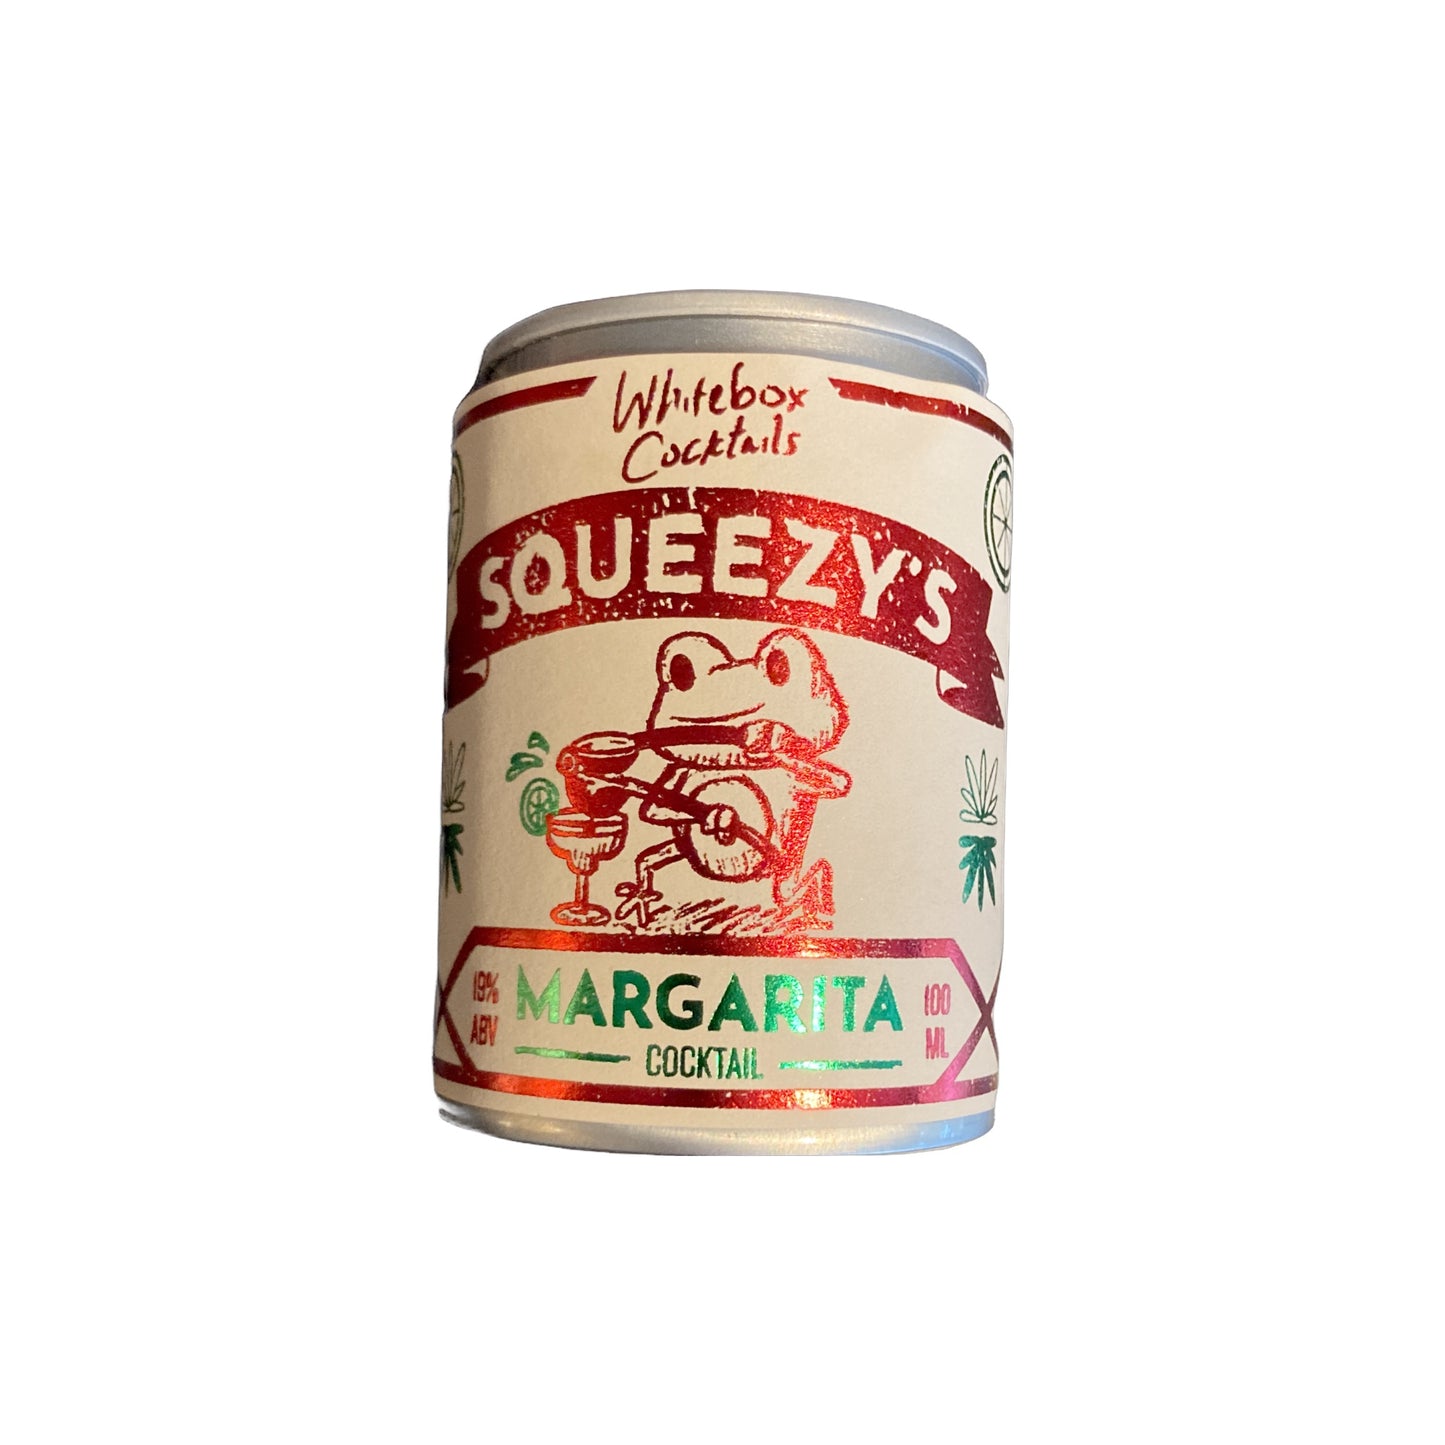 Whitebox Cocktails Squeezy's Margarita 100ml Can